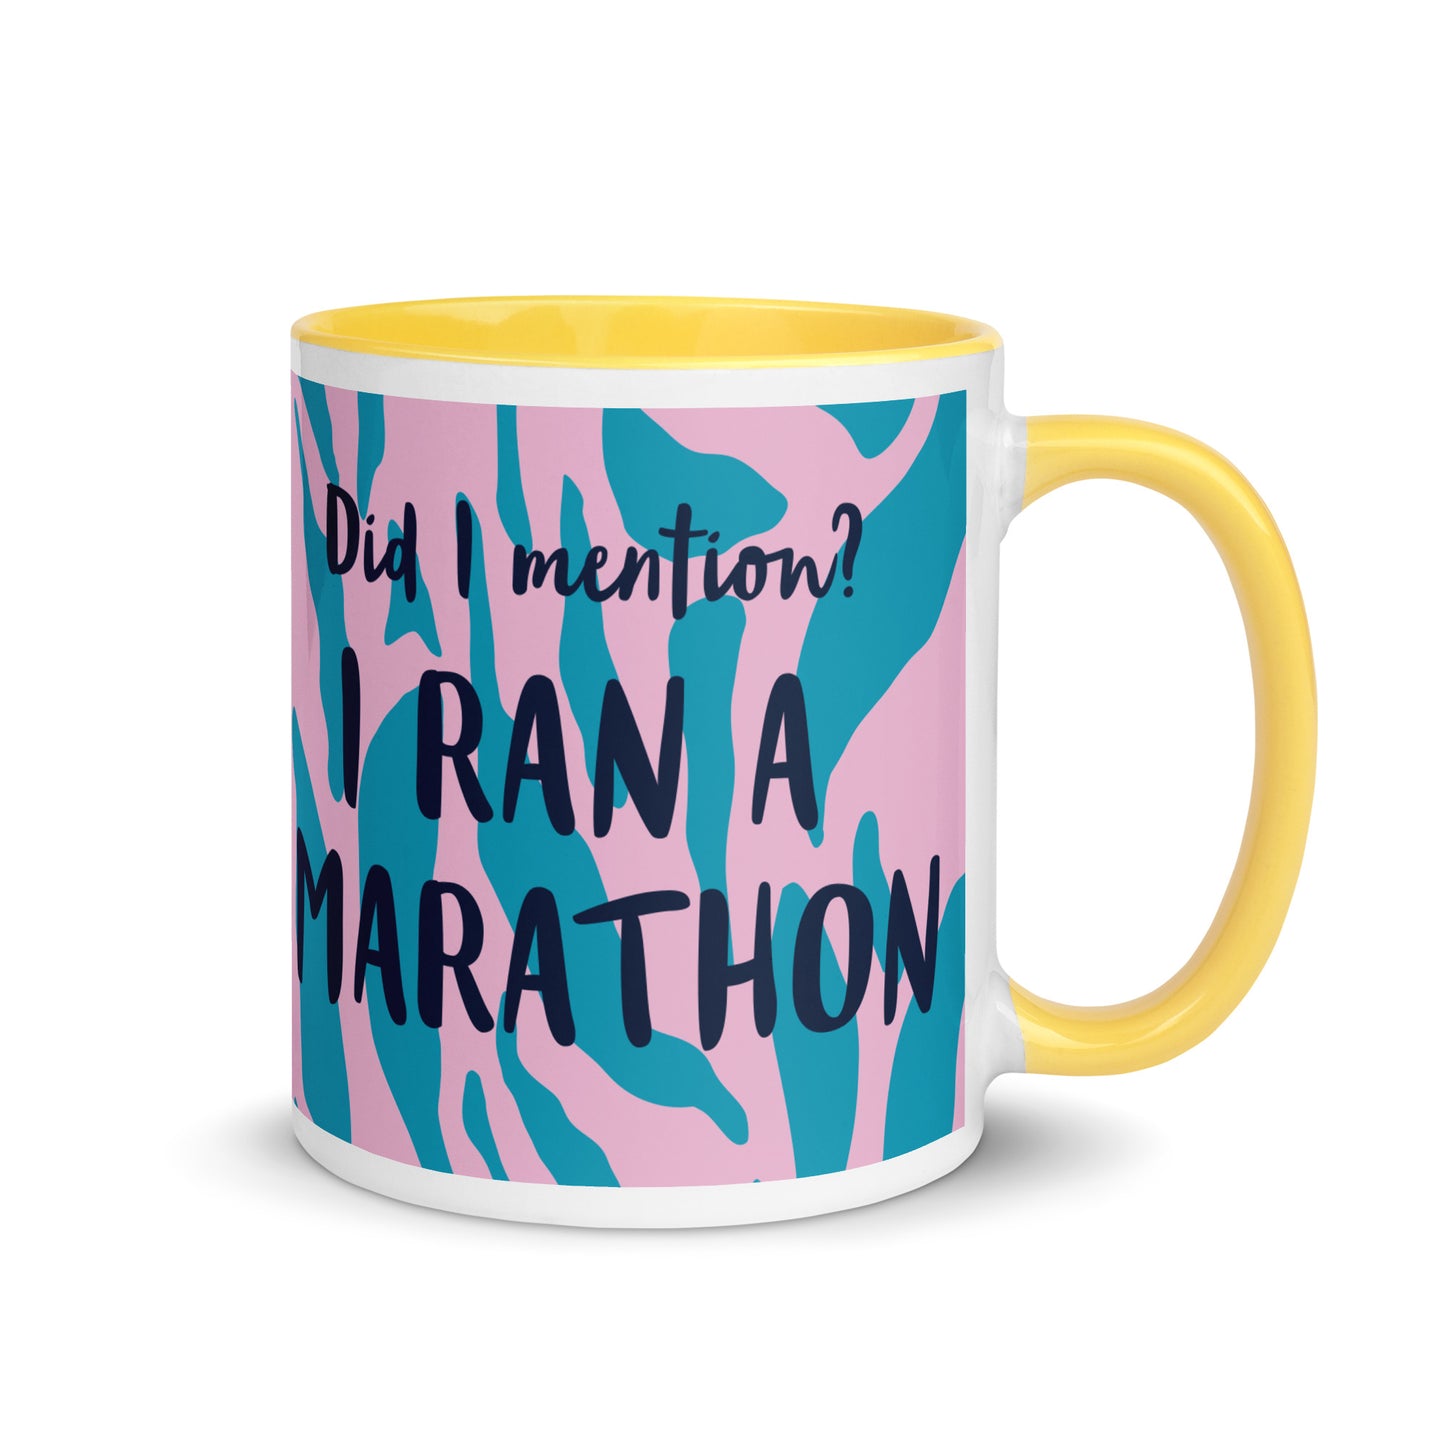 yellow handled coffee mug with a pink and blue leopard print design, with the words did i mention? I ran a marathon in a bold font  